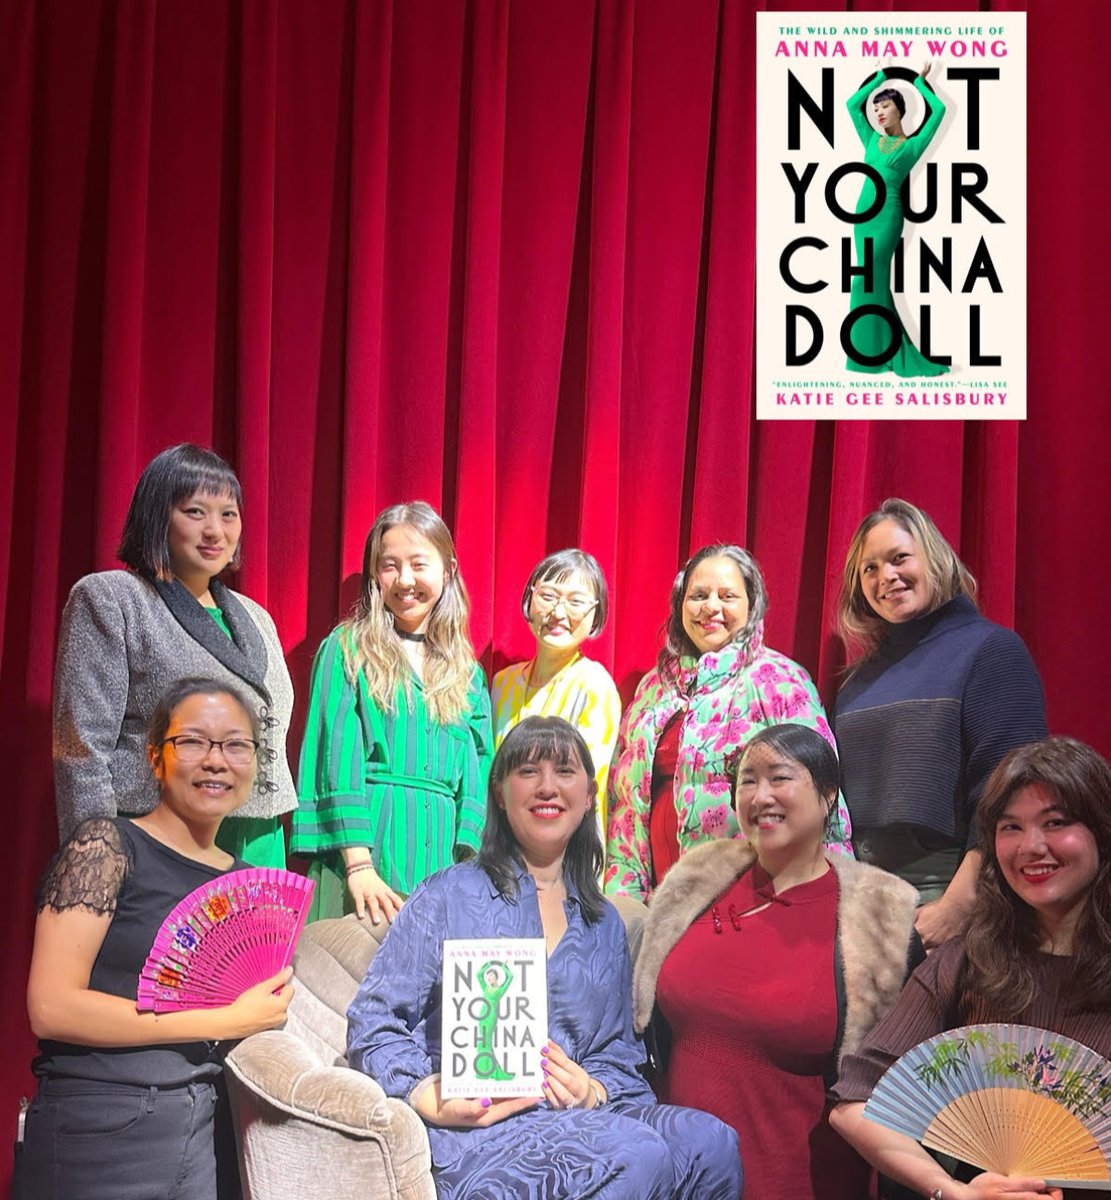 Our wonderful friend and book club-mate, @ksalisbury just published her debut nonfiction biography about Anna May Wong, NOT YOUR CHINA DOLL. Teachers, let's talk about Wong in our classrooms!